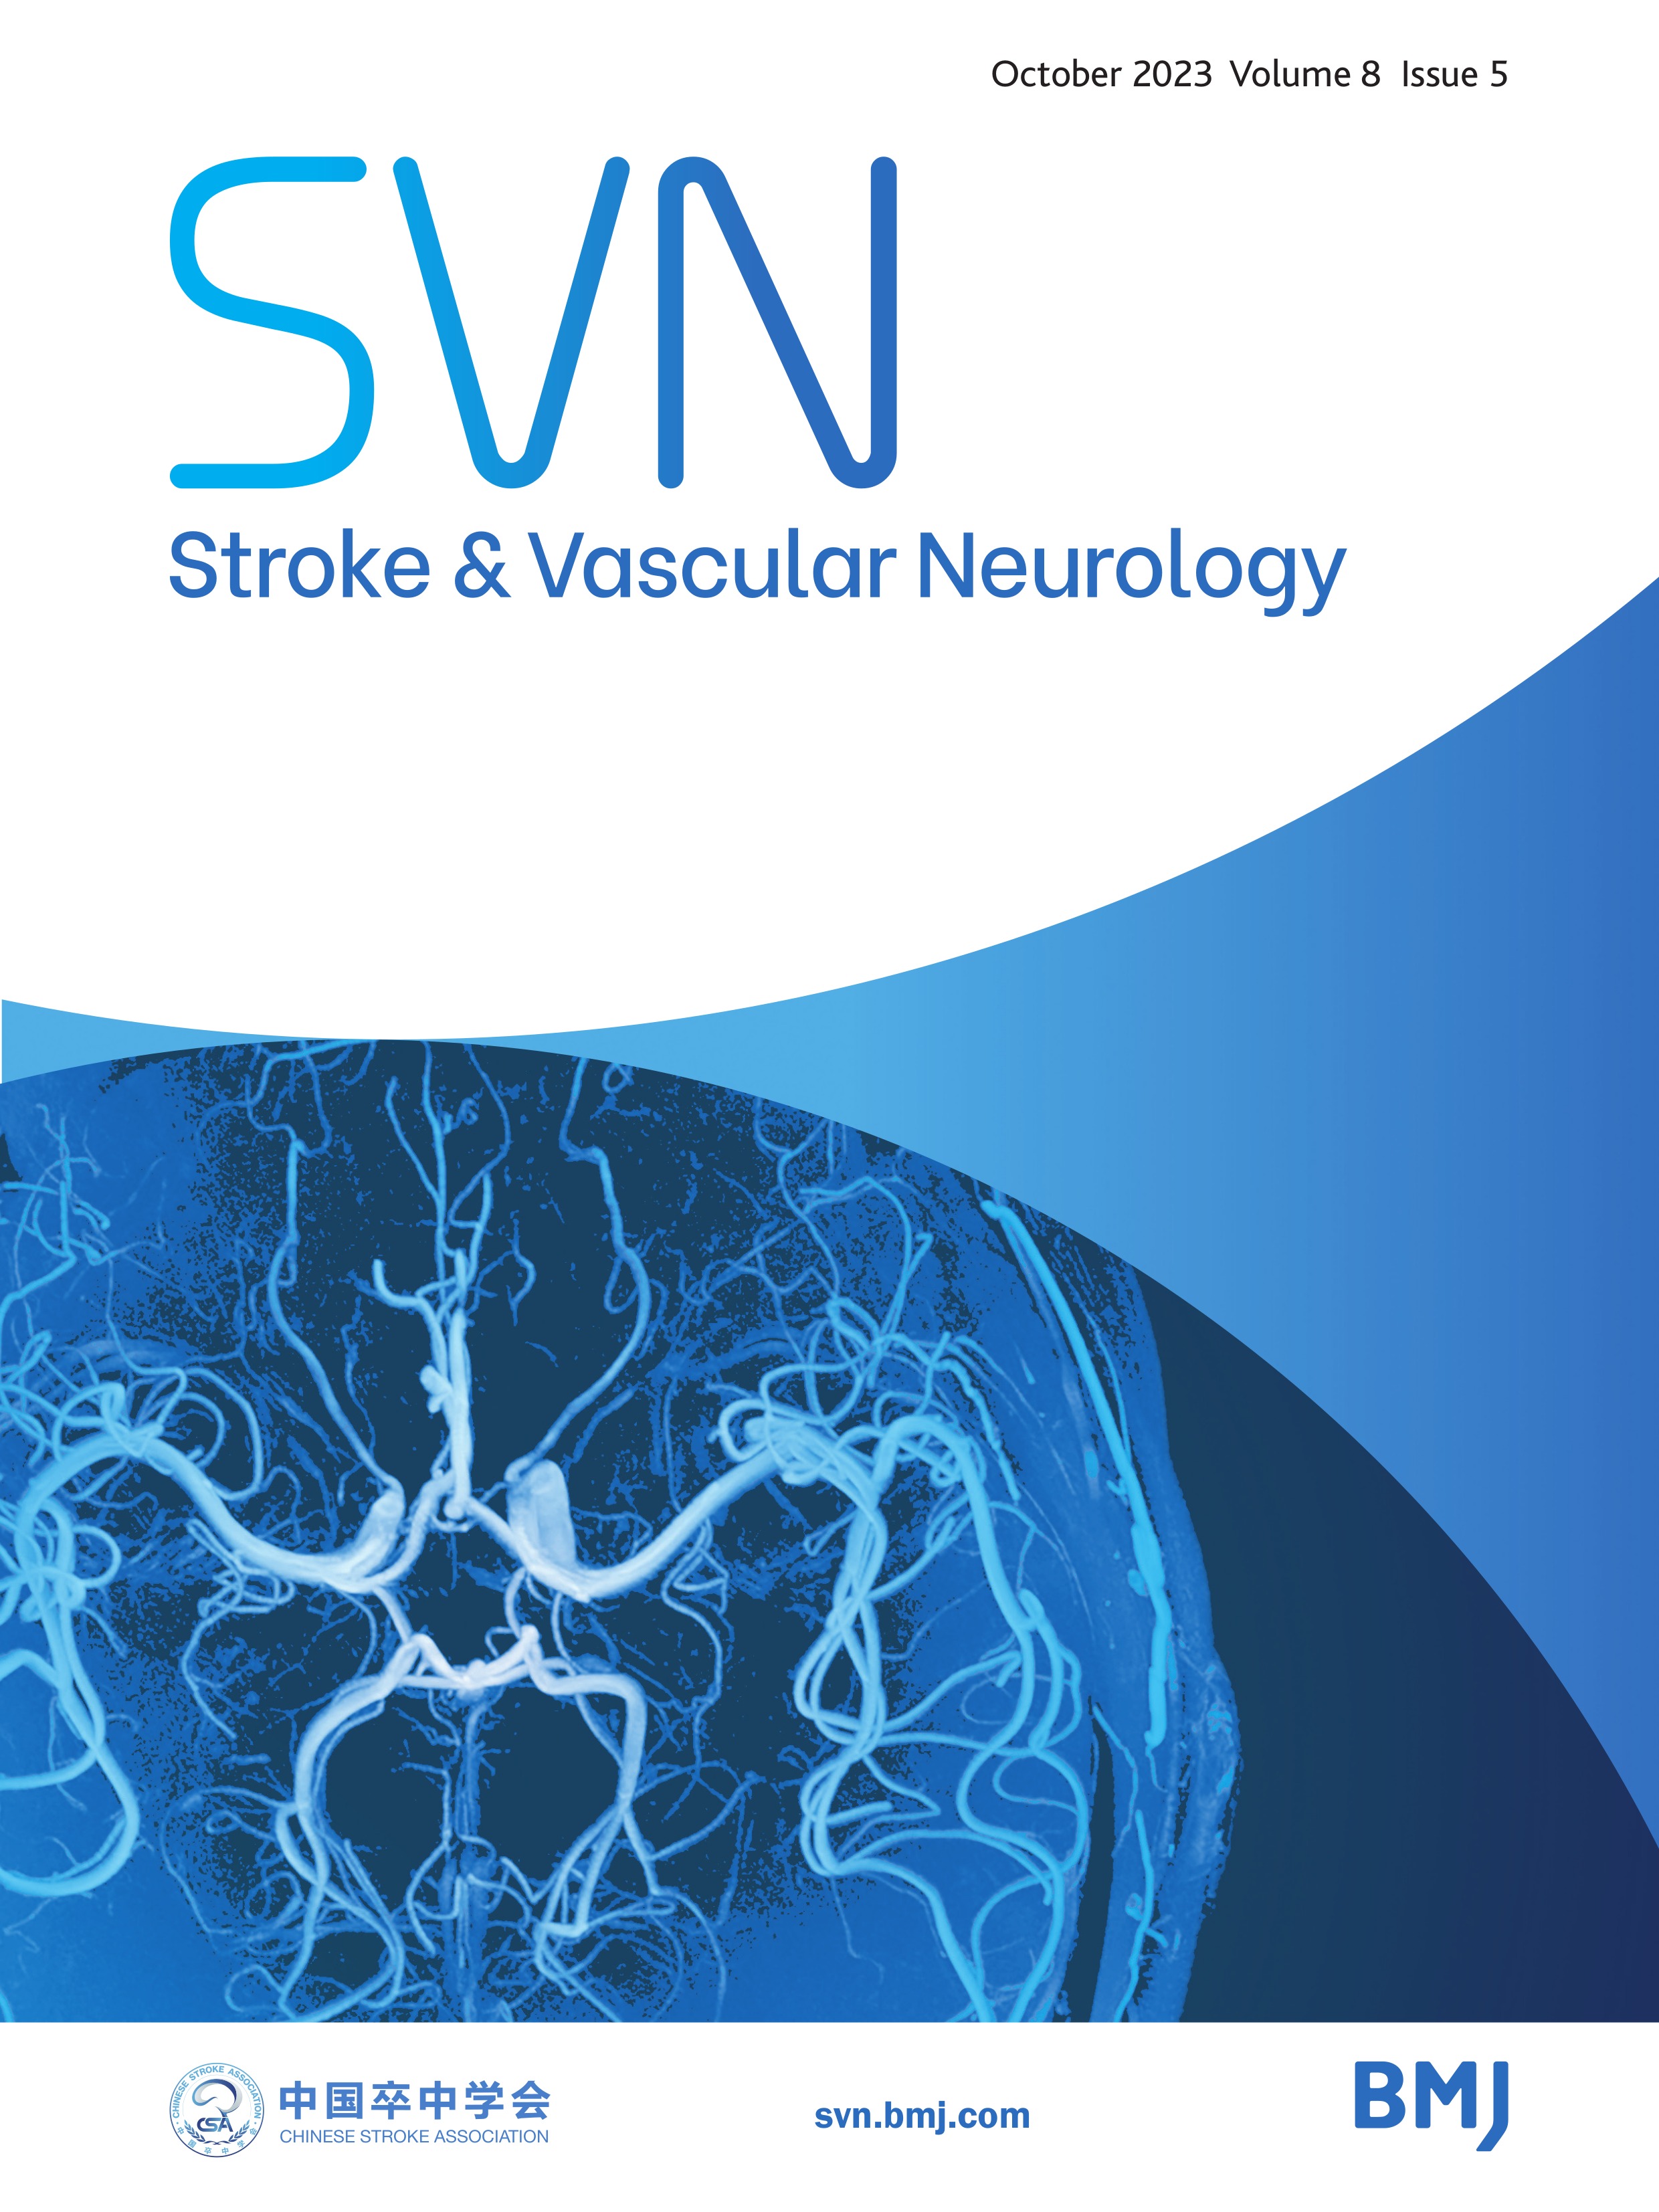 Retinal microvascular signs and recurrent vascular events in patients with TIA or minor stroke